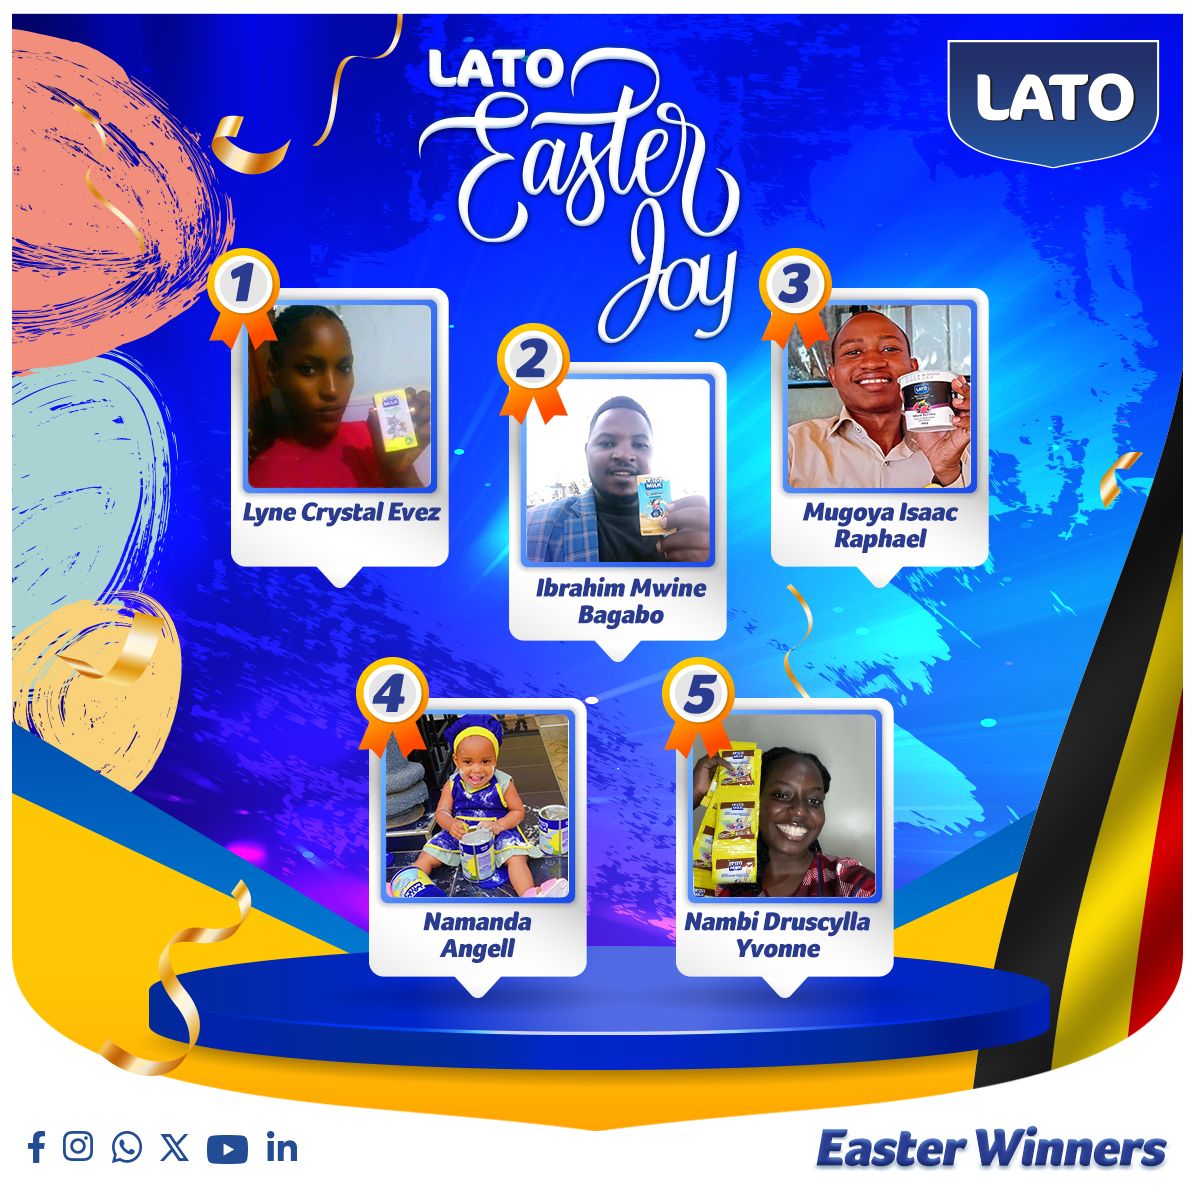 Congratulations to our Lato Easter Joy Selfie Contest winners from Kenya & Uganda! 🎉📸 The winners will enjoy a delightful lunch date for two. Thank you all for spreading joy and sharing your festive moments with us! #LatoWinners #EasterJoy #LatoEasterJoy #WinnersAnnouncement